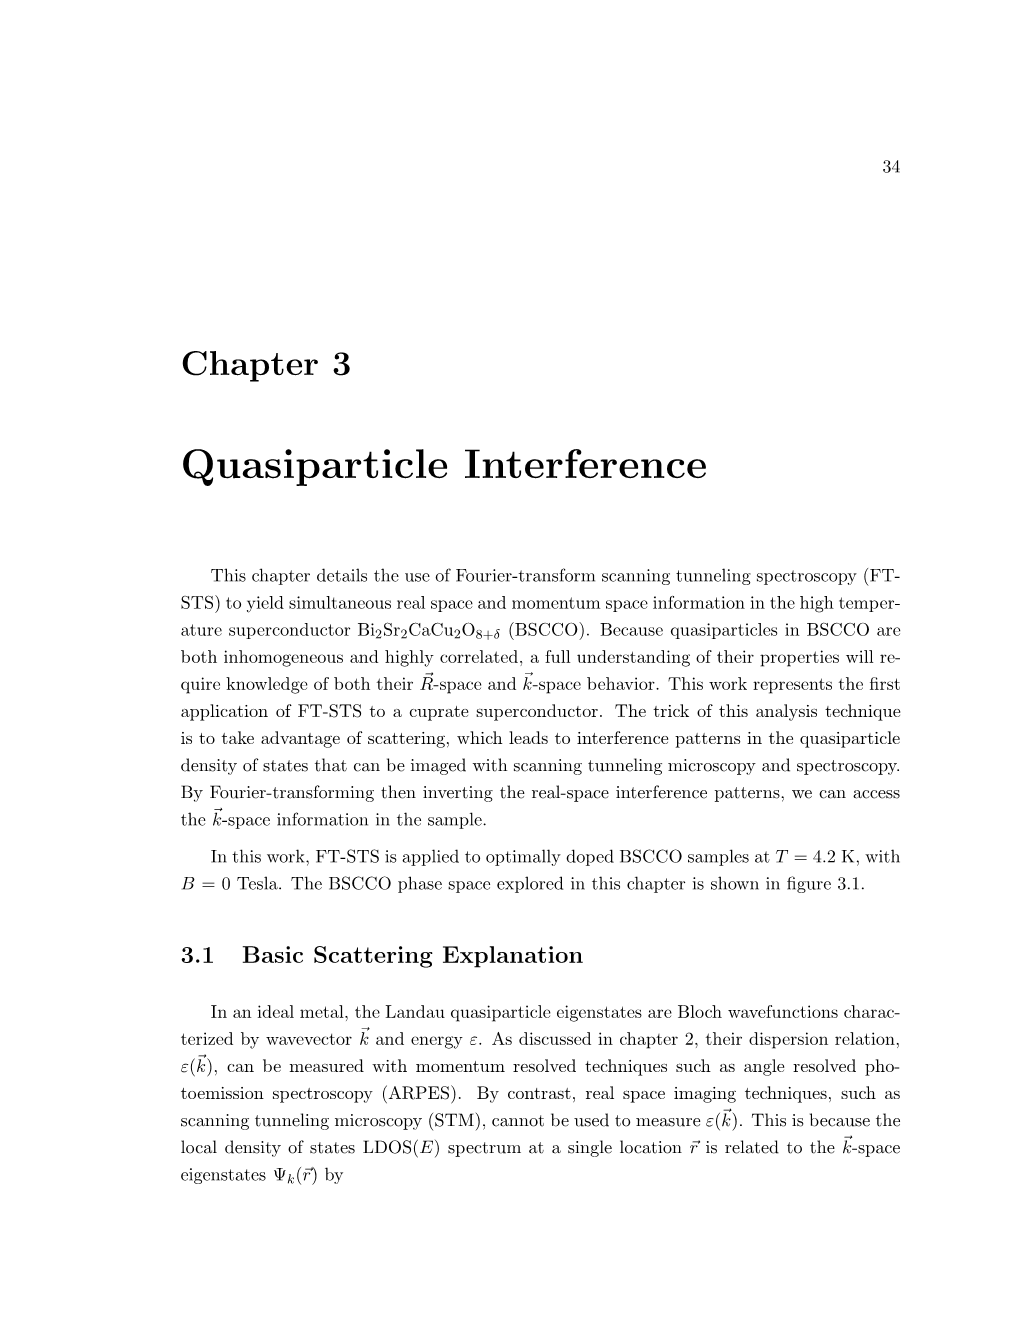 Quasiparticle Interference